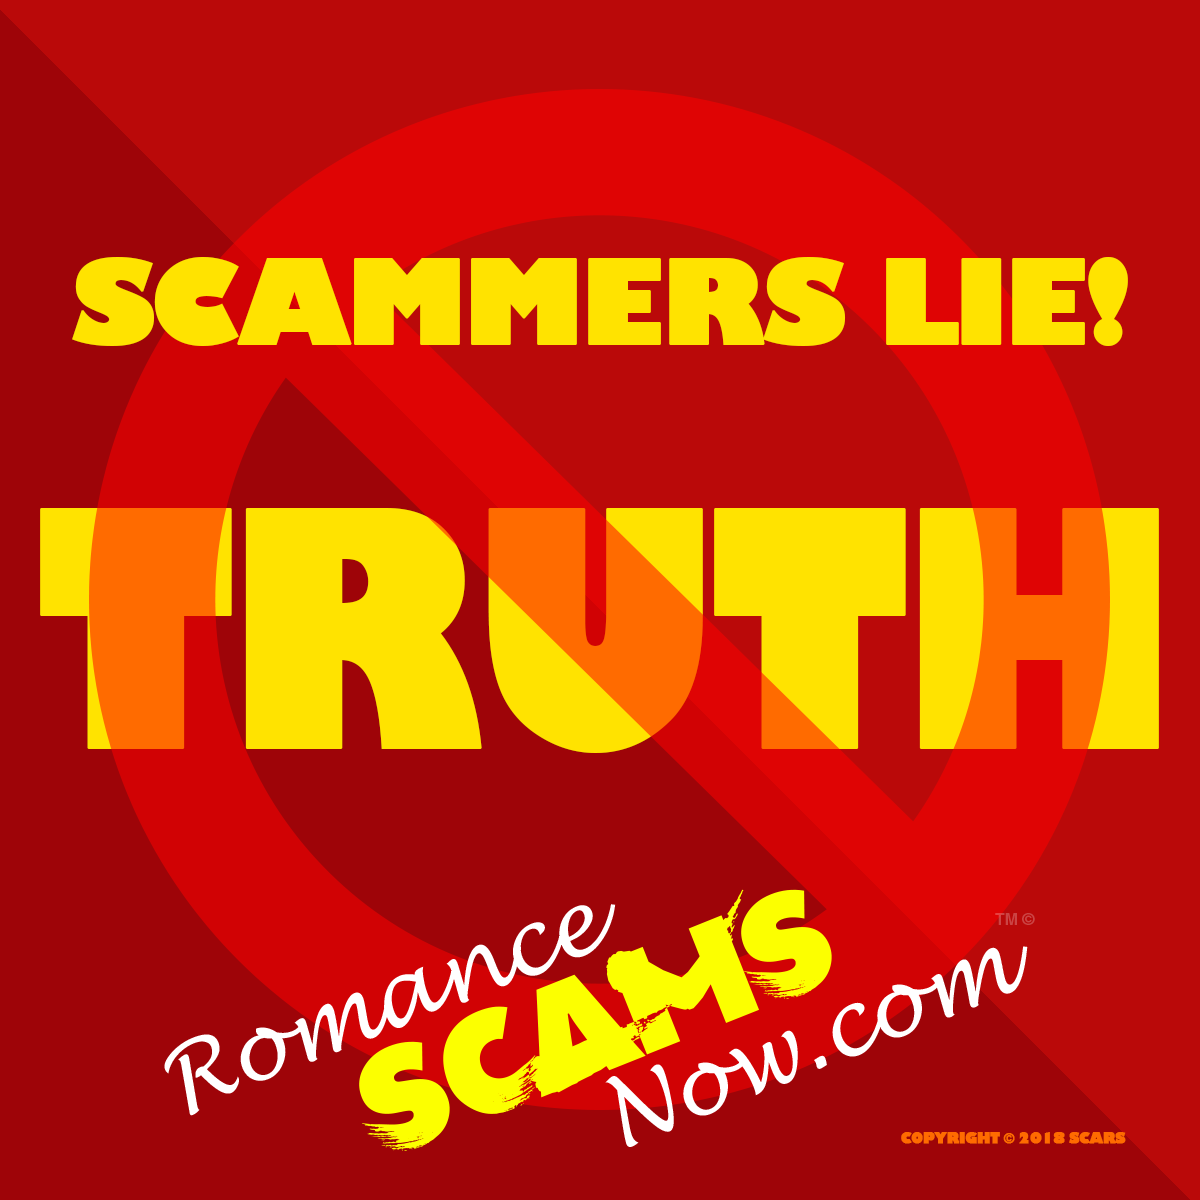 SCARS ™ / RSN™ Anti-Scam Poster 57